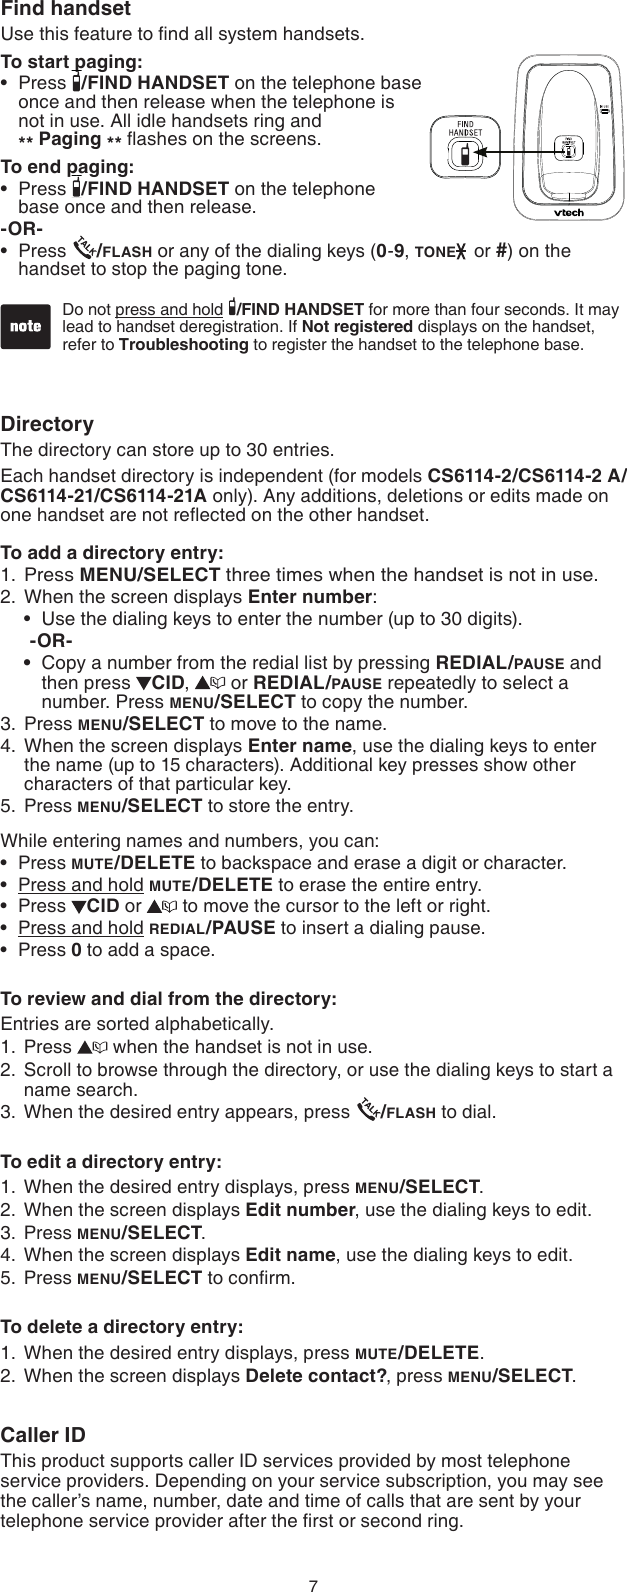 7DirectoryThe directory can store up to 30 entries.Each handset directory is independent (for models CS6114-2/CS6114-2 A/ CS6114-21/CS6114-21A only). Any additions, deletions or edits made on one handset are not reﬂected on the other handset.To add a directory entry:Press MENU/SELECT three times when the handset is not in use.2.  When the screen displays Enter number:Use the dialing keys to enter the number (up to 30 digits).-OR-Copy a number from the redial list by pressing REDIAL/PAUSE and then press  CID,   or REDIAL/PAUSE repeatedly to select a number. Press MENU/SELECT to copy the number.Press MENU/SELECT to move to the name. When the screen displays Enter name, use the dialing keys to enter the name (up to 15 characters). Additional key presses show other characters of that particular key.Press MENU/SELECT to store the entry.While entering names and numbers, you can:Press MUTE/DELETE to backspace and erase a digit or character.Press and hold MUTE/DELETE to erase the entire entry.Press  CID or   to move the cursor to the left or right.Press and hold REDIAL/PAUSE to insert a dialing pause.Press 0 to add a space.To review and dial from the directory:Entries are sorted alphabetically.Press   when the handset is not in use.Scroll to browse through the directory, or use the dialing keys to start a name search.When the desired entry appears, press  /FLASH to dial.To edit a directory entry:When the desired entry displays, press MENU/SELECT.When the screen displays Edit number, use the dialing keys to edit.Press MENU/SELECT.When the screen displays Edit name, use the dialing keys to edit.Press MENU/SELECT to conﬁrm.To delete a directory entry:When the desired entry displays, press MUTE/DELETE.When the screen displays Delete contact?, press MENU/SELECT.Caller IDThis product supports caller ID services provided by most telephone  service providers. Depending on your service subscription, you may see  the caller’s name, number, date and time of calls that are sent by your telephone service provider after the ﬁrst or second ring.1.••3.4.5.•••••1.2.3.1.2.3.4.5.1.2.Find handsetUse this feature to ﬁnd all system handsets.To start paging:Press  /FIND HANDSET on the telephone base      once and then release when the telephone is        not in use. All idle handsets ring and          ** Paging ** ﬂashes on the screens.To end paging:Press  /FIND HANDSET on the telephone      base once and then release.-OR-Press  /FLASH or any of the dialing keys (0-9, TONE  or #) on the handset to stop the paging tone.•••Do not press and hold  /FIND HANDSET for more than four seconds. It may lead to handset deregistration. If Not registered displays on the handset, refer to Troubleshooting to register the handset to the telephone base.